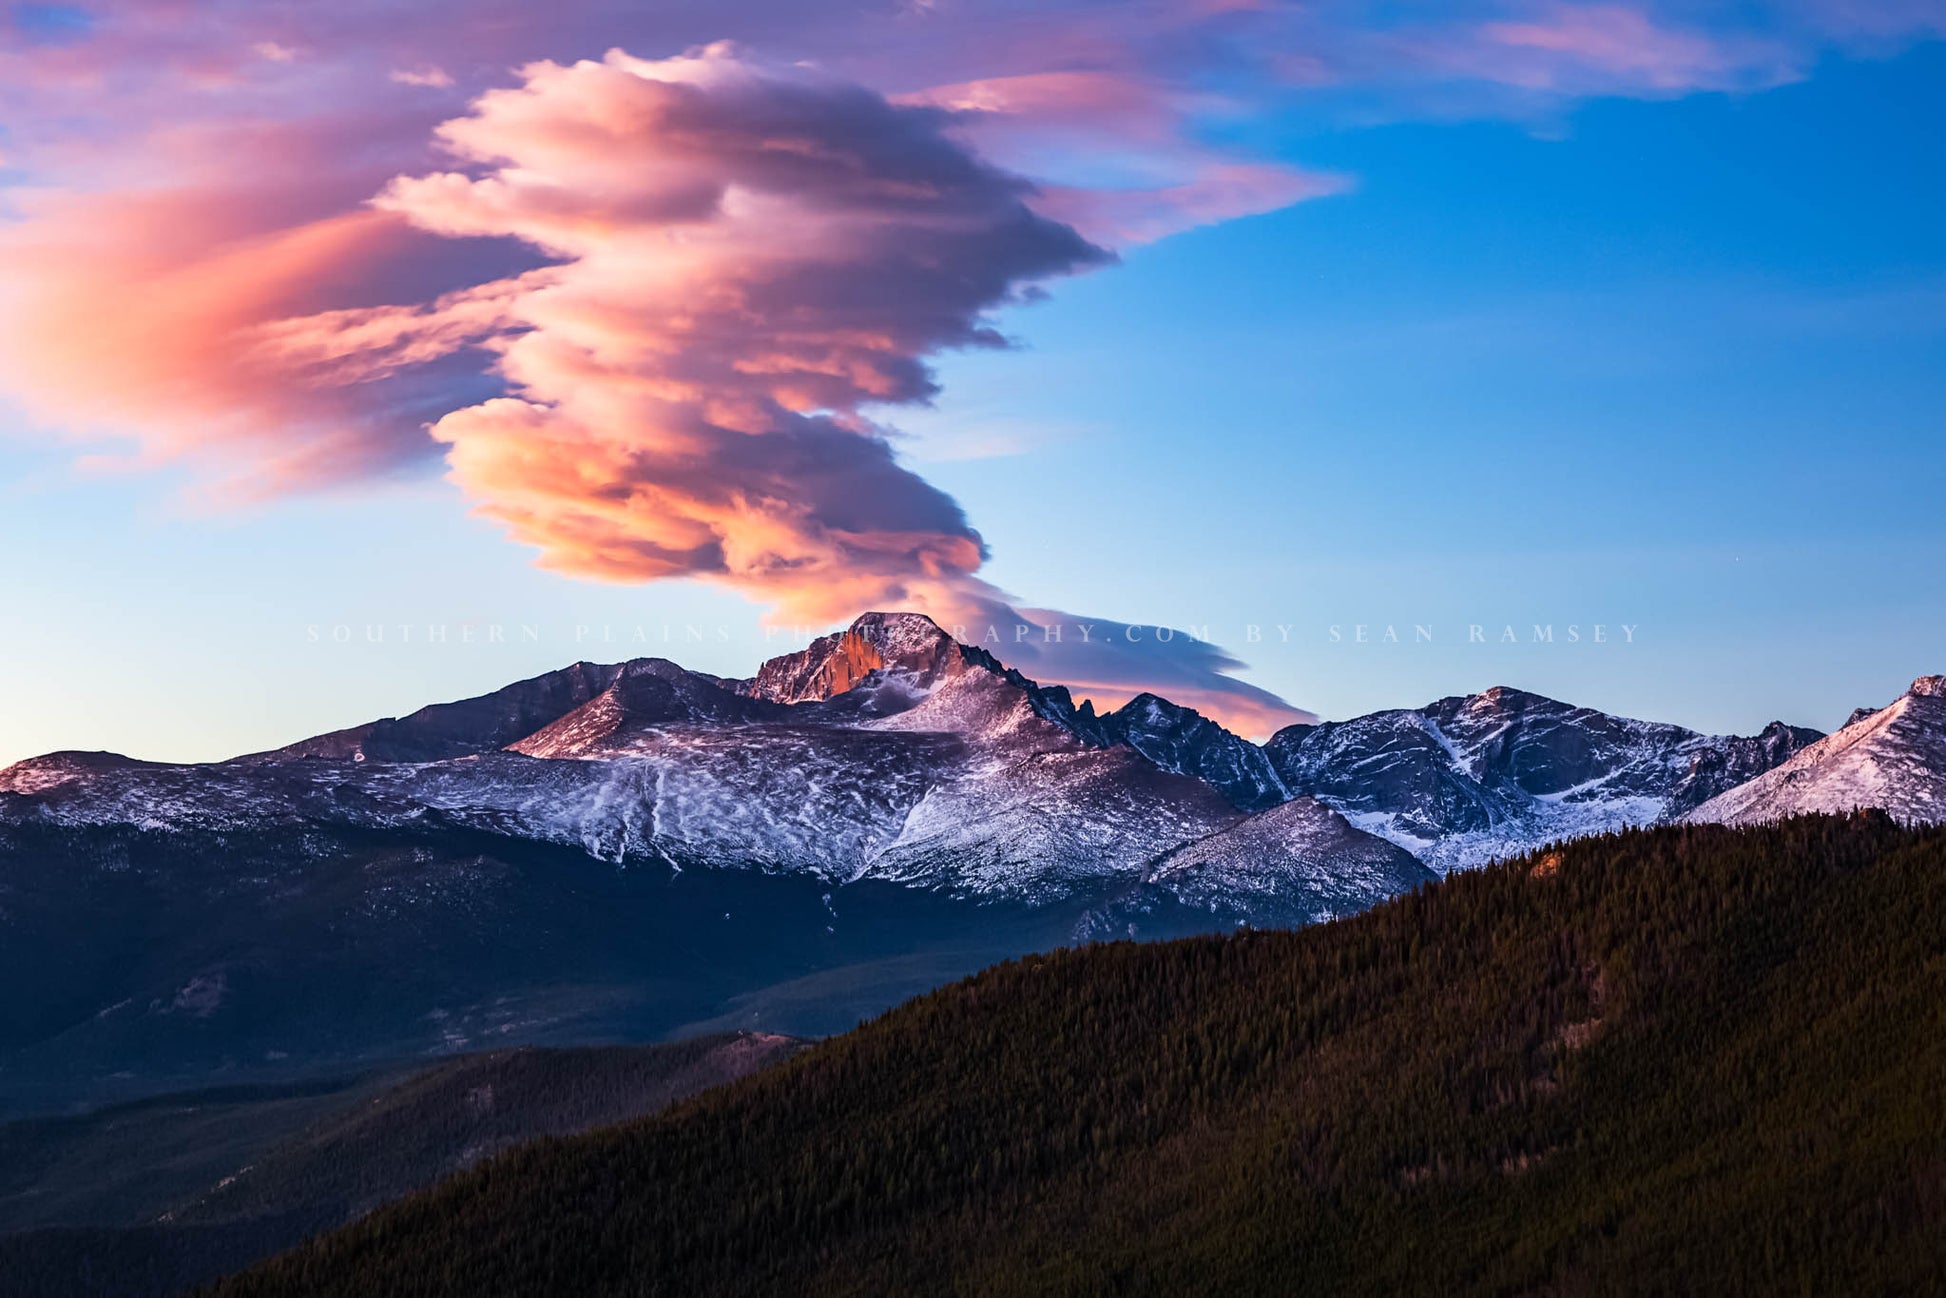 Western landscape photography print of a cloud rising above Longs Peak at sunrise on an autumn morning in Rocky Mountain National Park, Colorado by Sean Ramsey of Southern Plains Photography.